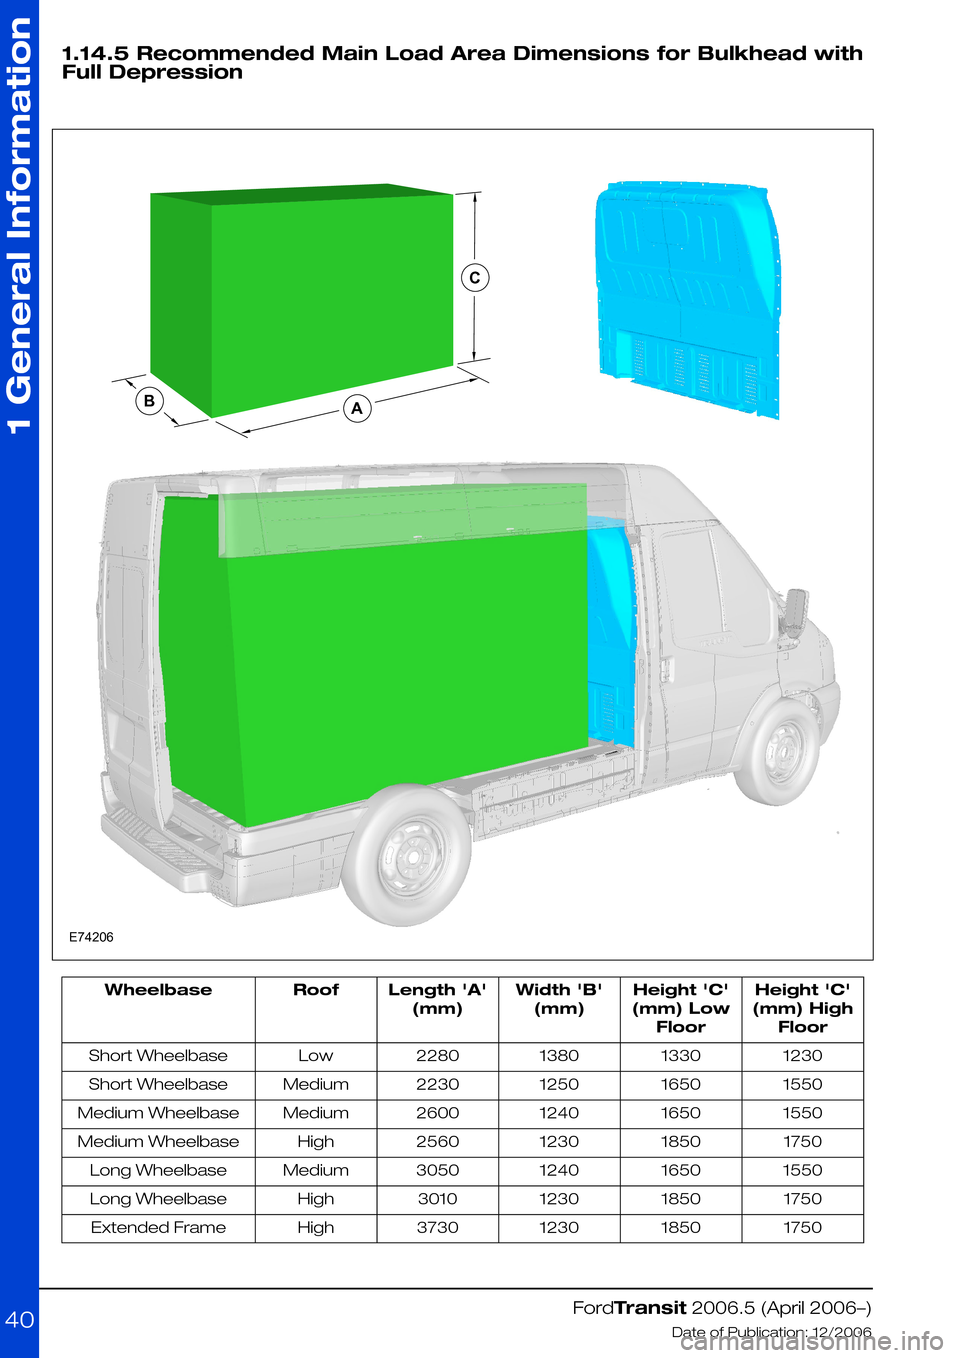 FORD TRANSIT 2006 7.G Body And Equipment Mounting Section Manual 1.14.5 Recommended Main Load Area Dimensions for Bulkhead with
Full Depression
Height C
(mm) High
Floor
Height C
(mm) Low
Floor
Width B
(mm)
Length A
(mm)
RoofWheelbase
1230133013802280LowShor